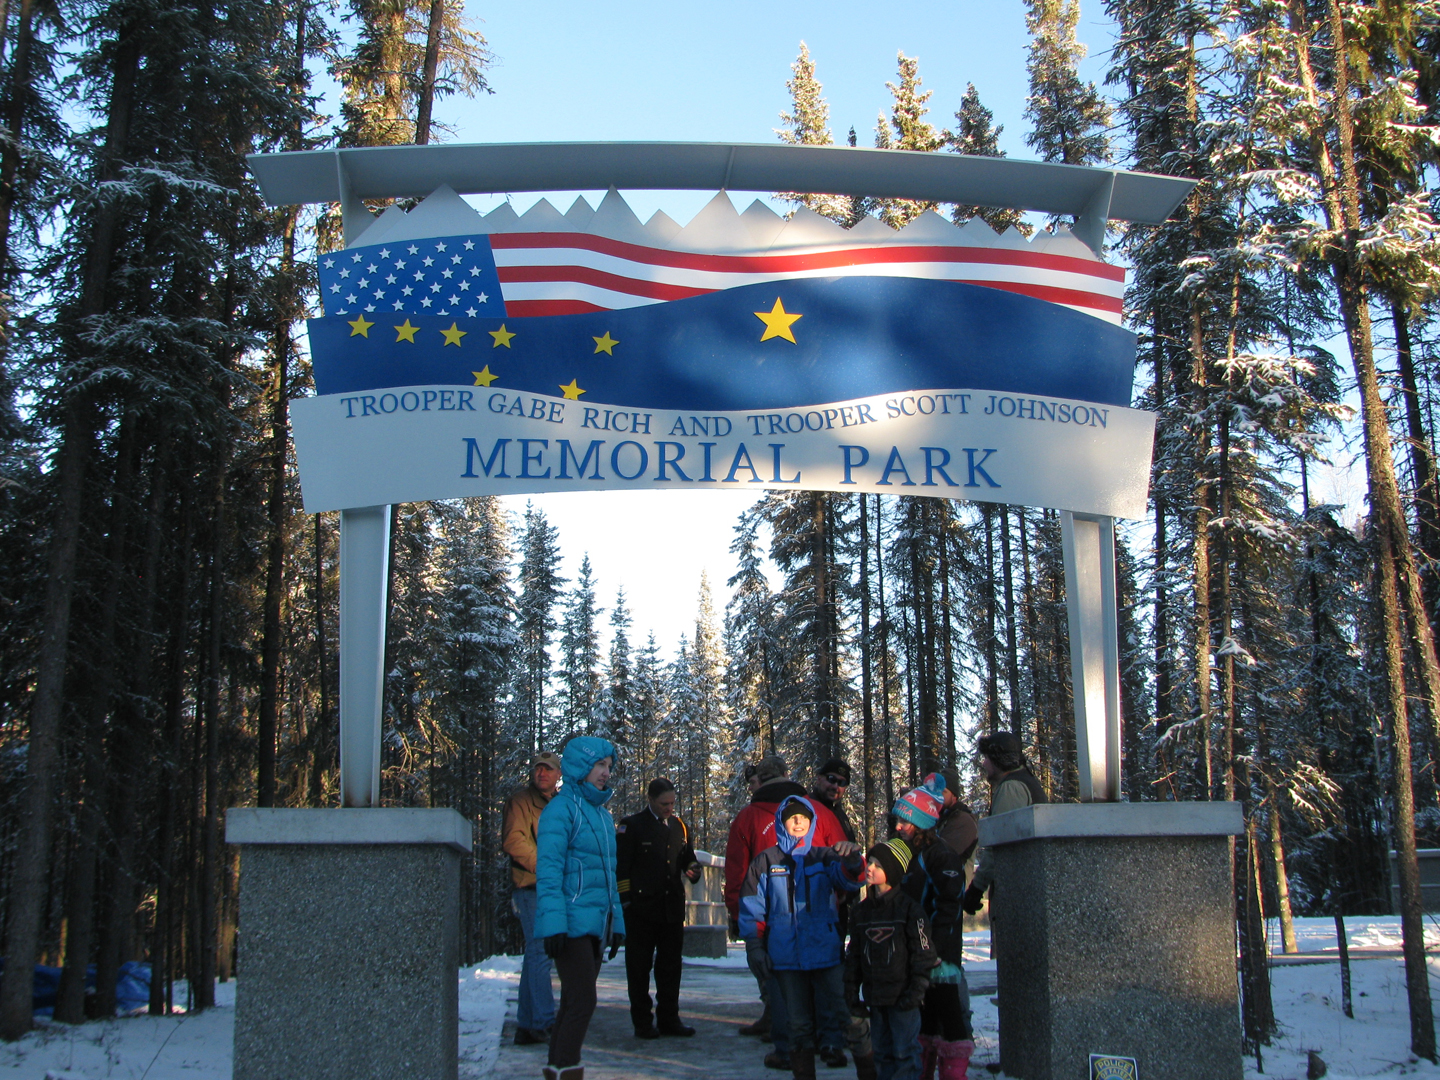 Residents gather underneath the newly unveiled Memorial Park arch in North Pole on Saturday. The arch honors Alaska State Trooper Gabe Rich and Sgt. Scott Johnson, both of whom were killed in action on May 1, 2014.